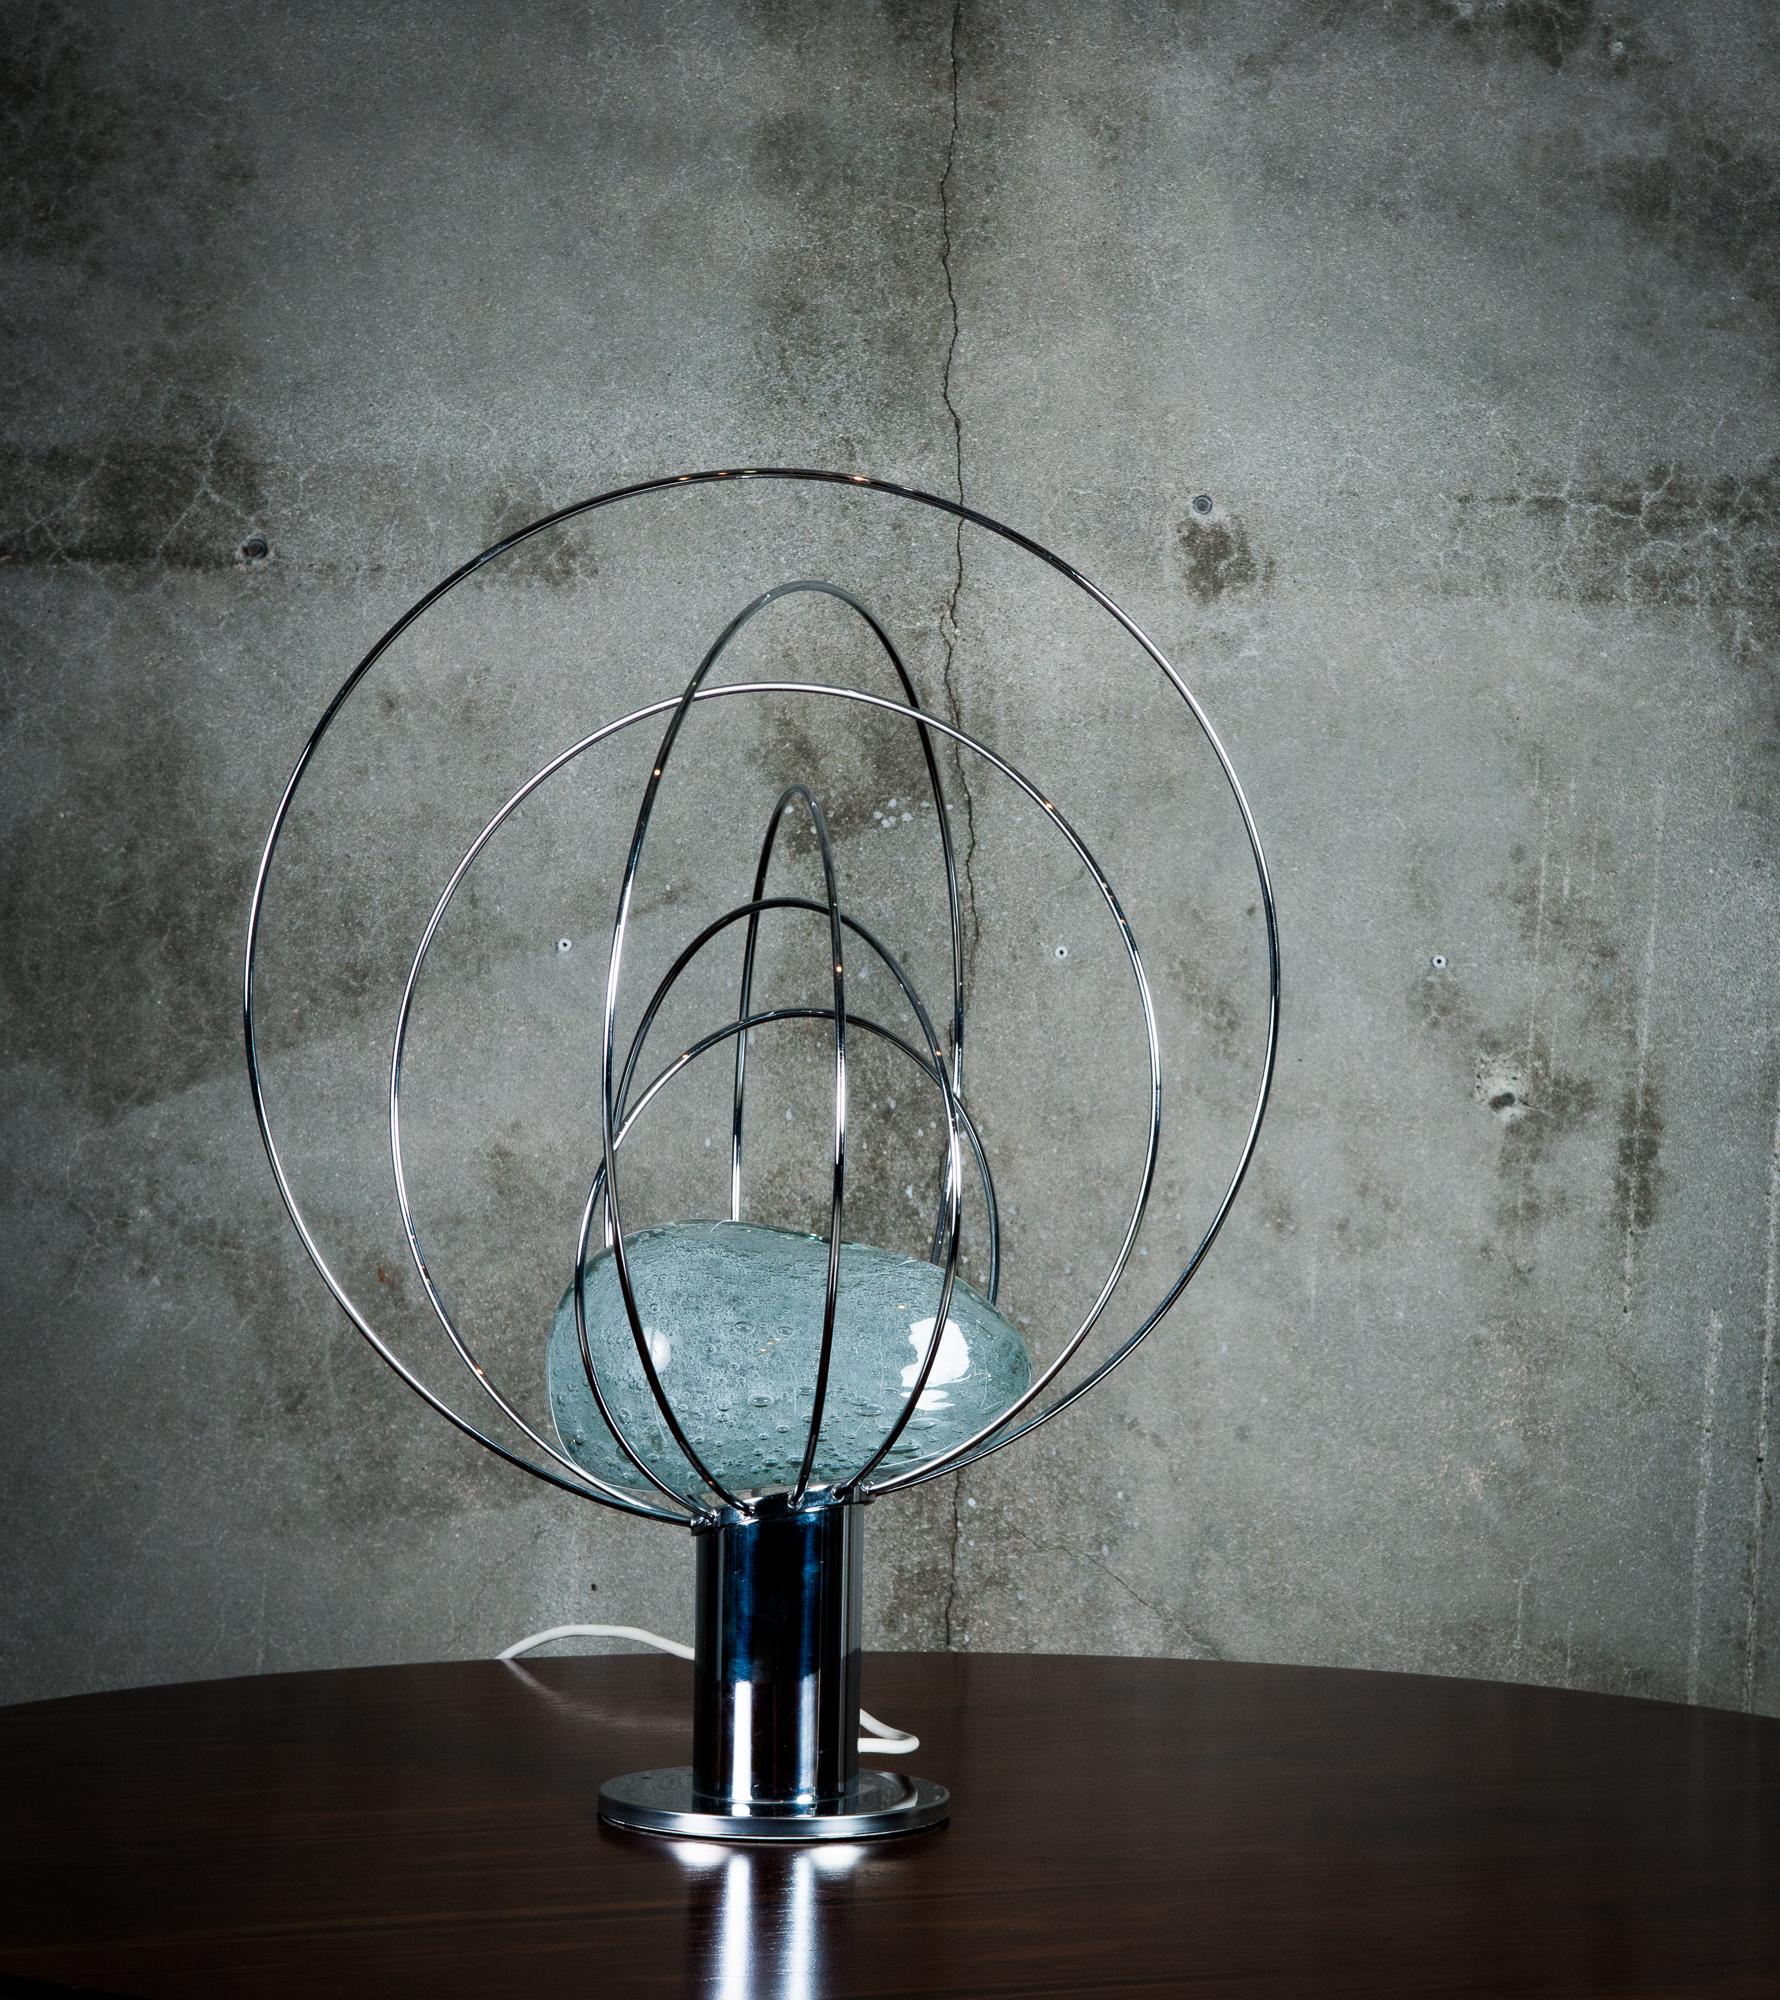 One Angelo Brotto 'Barnada' table lamp in chrome-plated steel and Murano glass. From Esperia, Italy circa 1970.